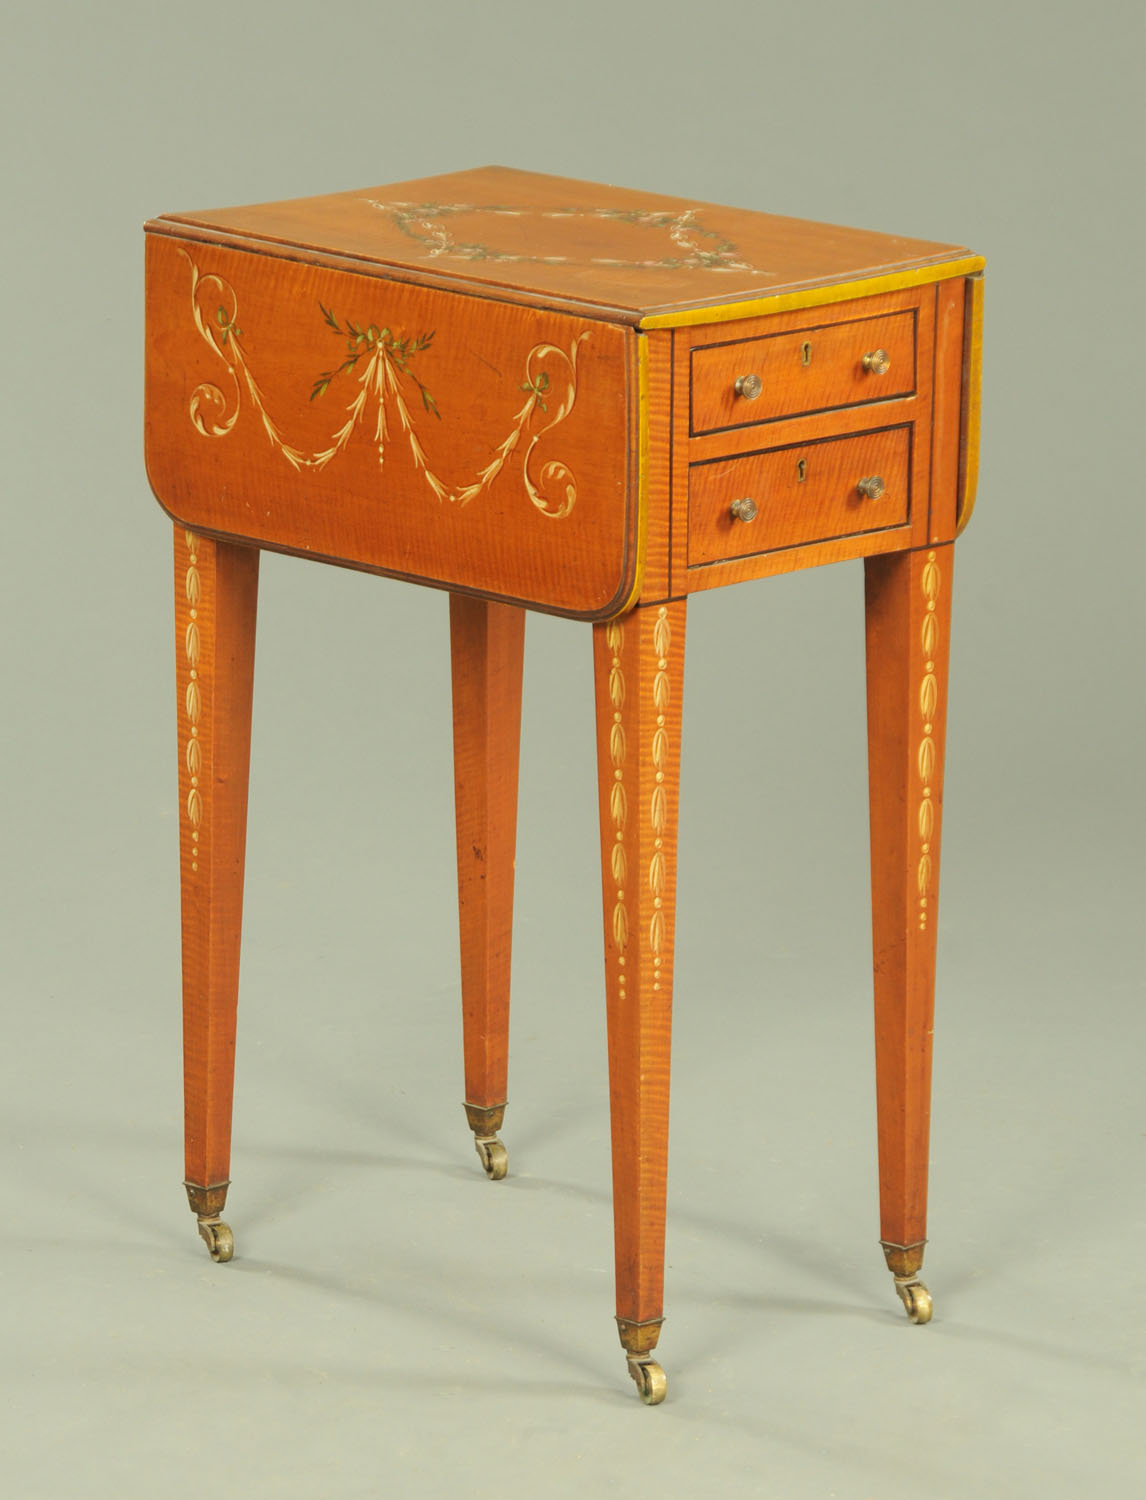 A 19th century painted satinwood work table, with elliptical drop leaves,